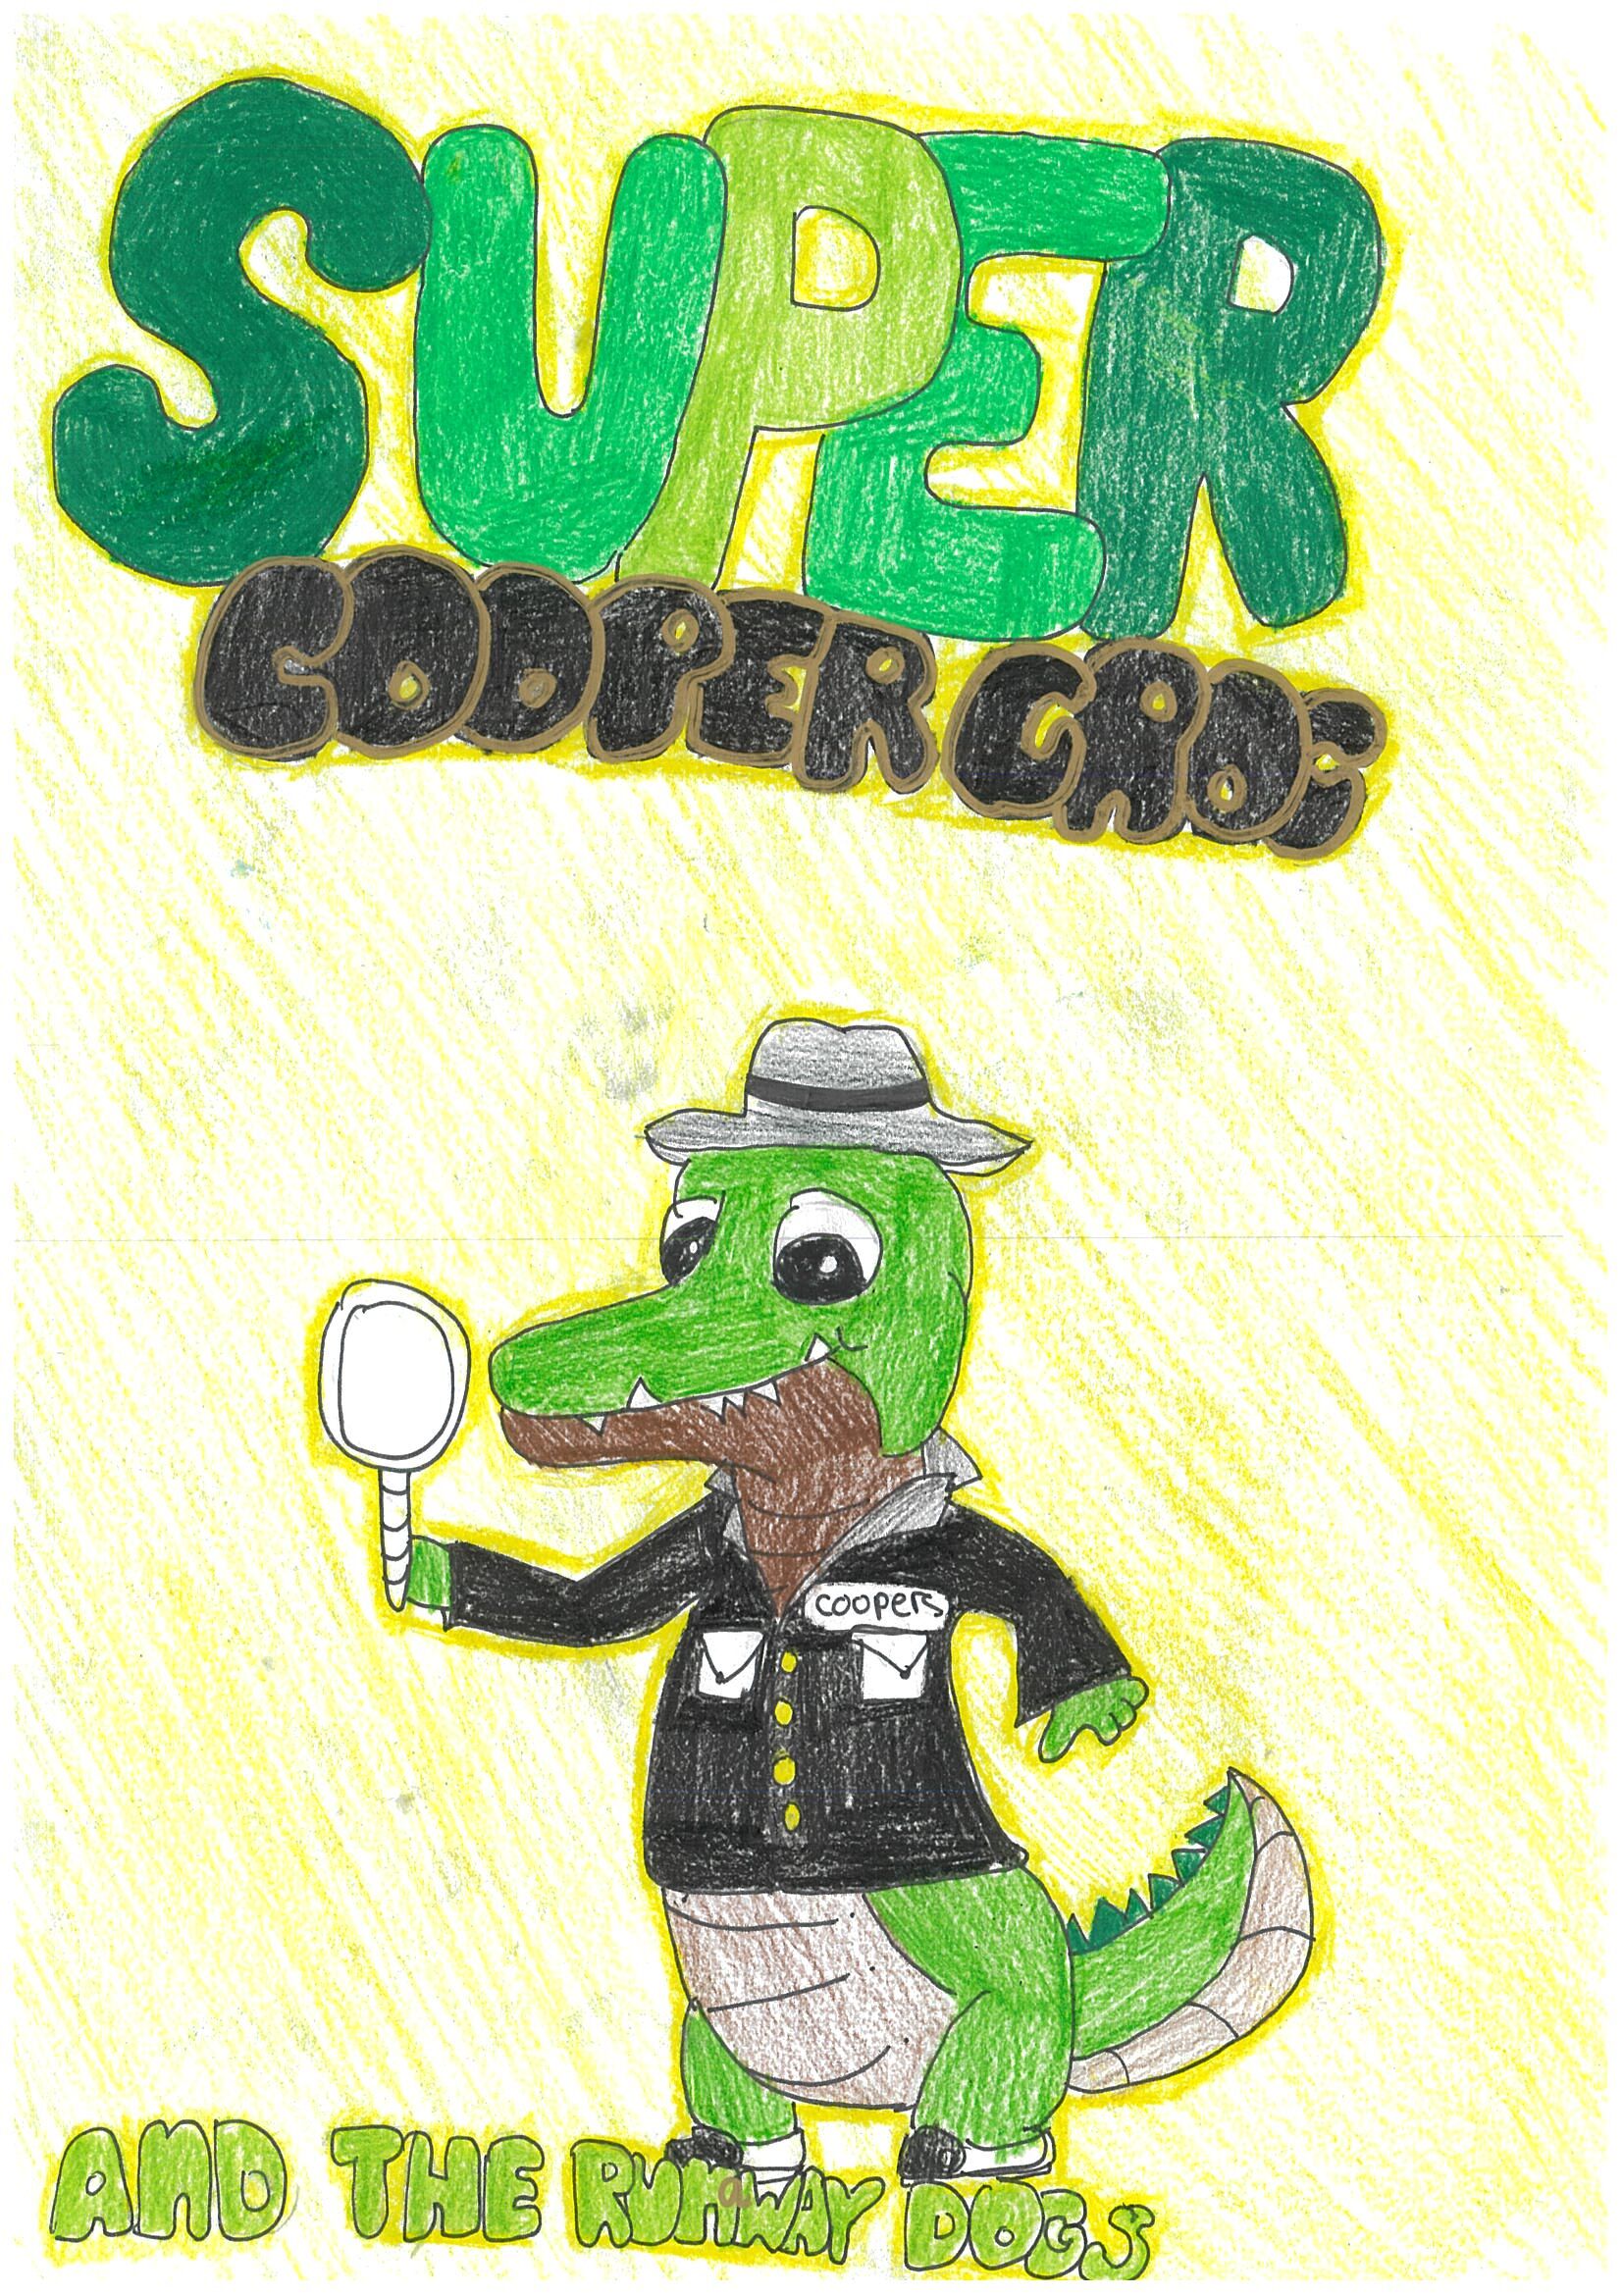 Super Cooper Croc and the Runaway Dogs